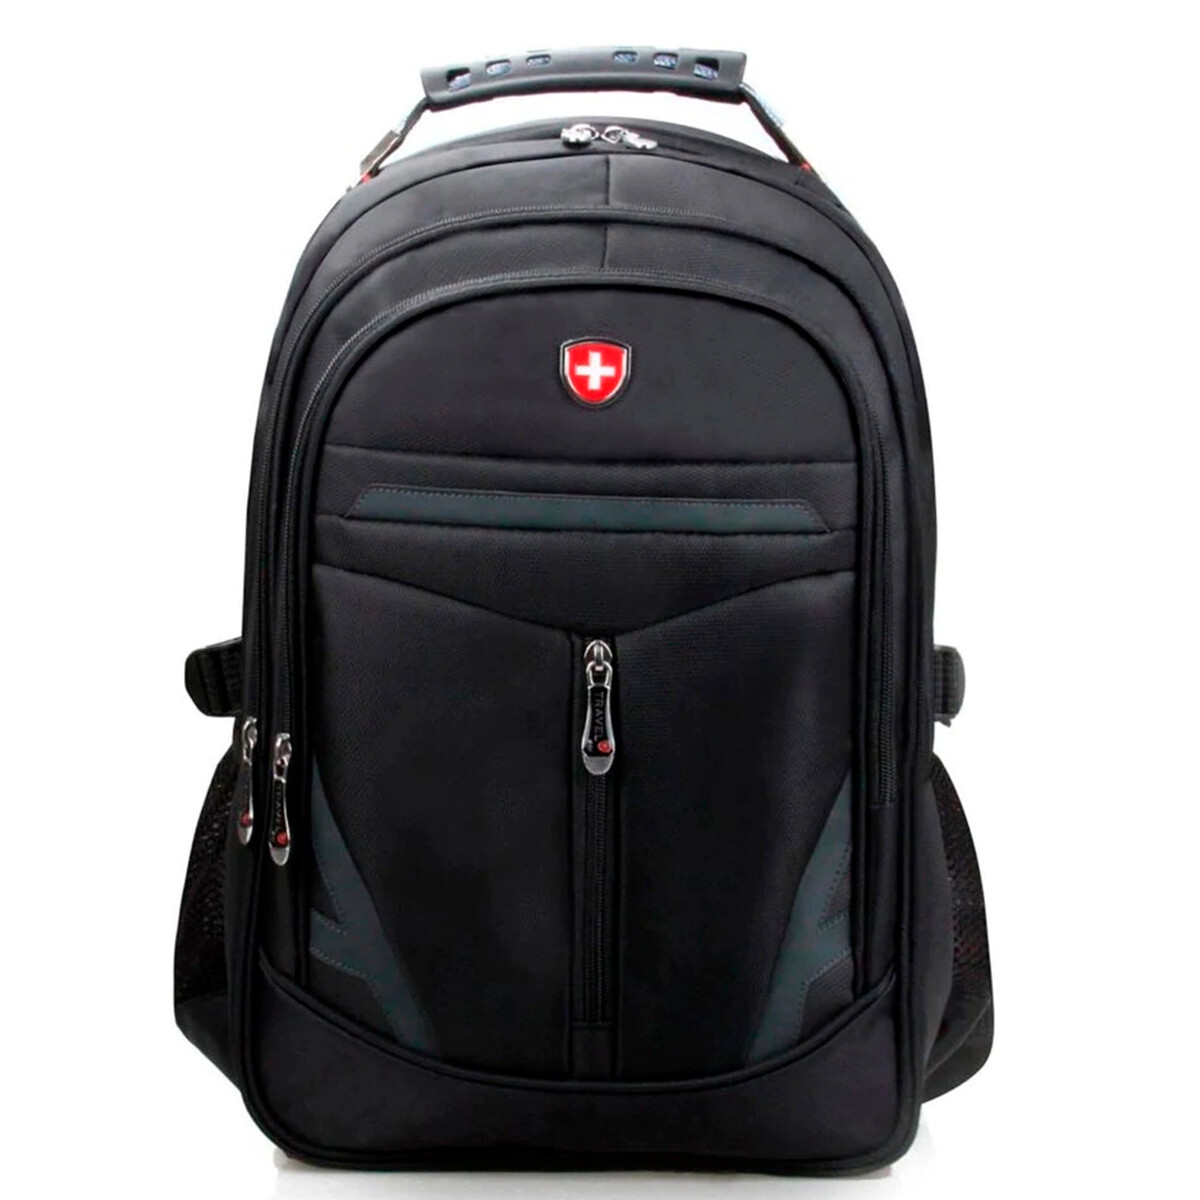 Mochila Swiss Ejecutiva Impermeable Laptop Notebook - Travel Max 18 Refor 